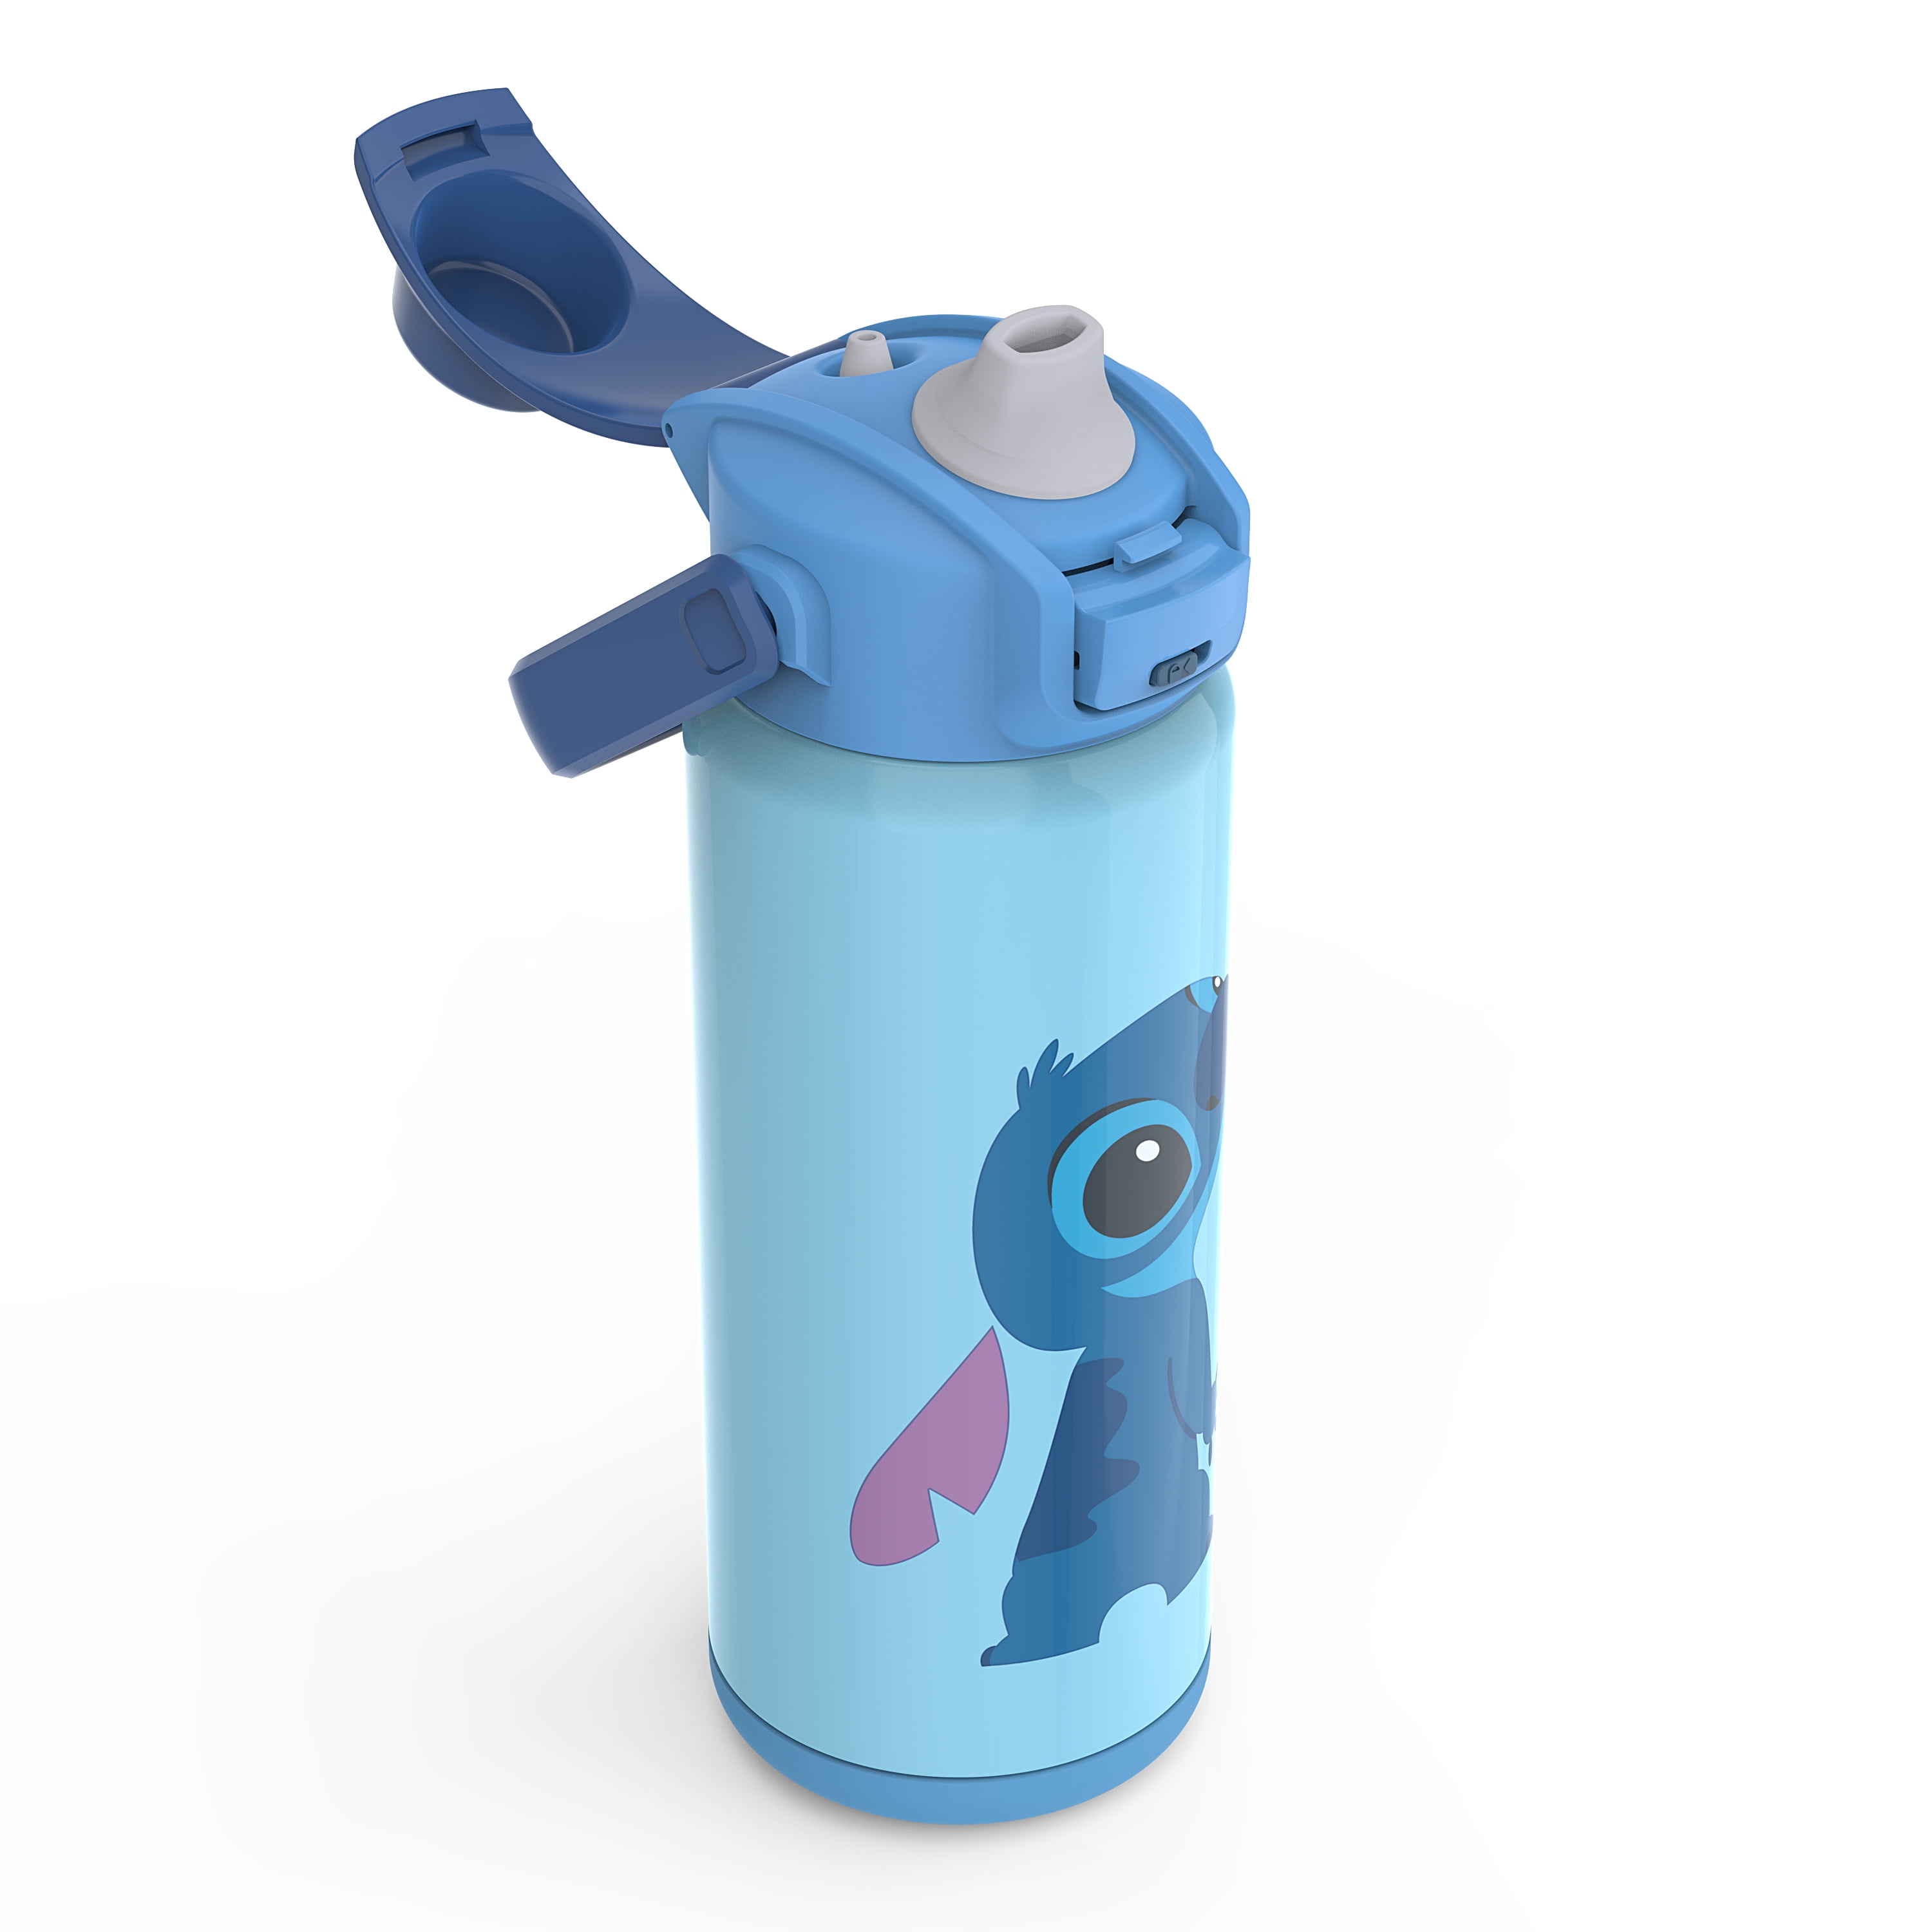 Stitch Stainless Steel Water Bottle with Built-In Straw – Lilo & Stitch